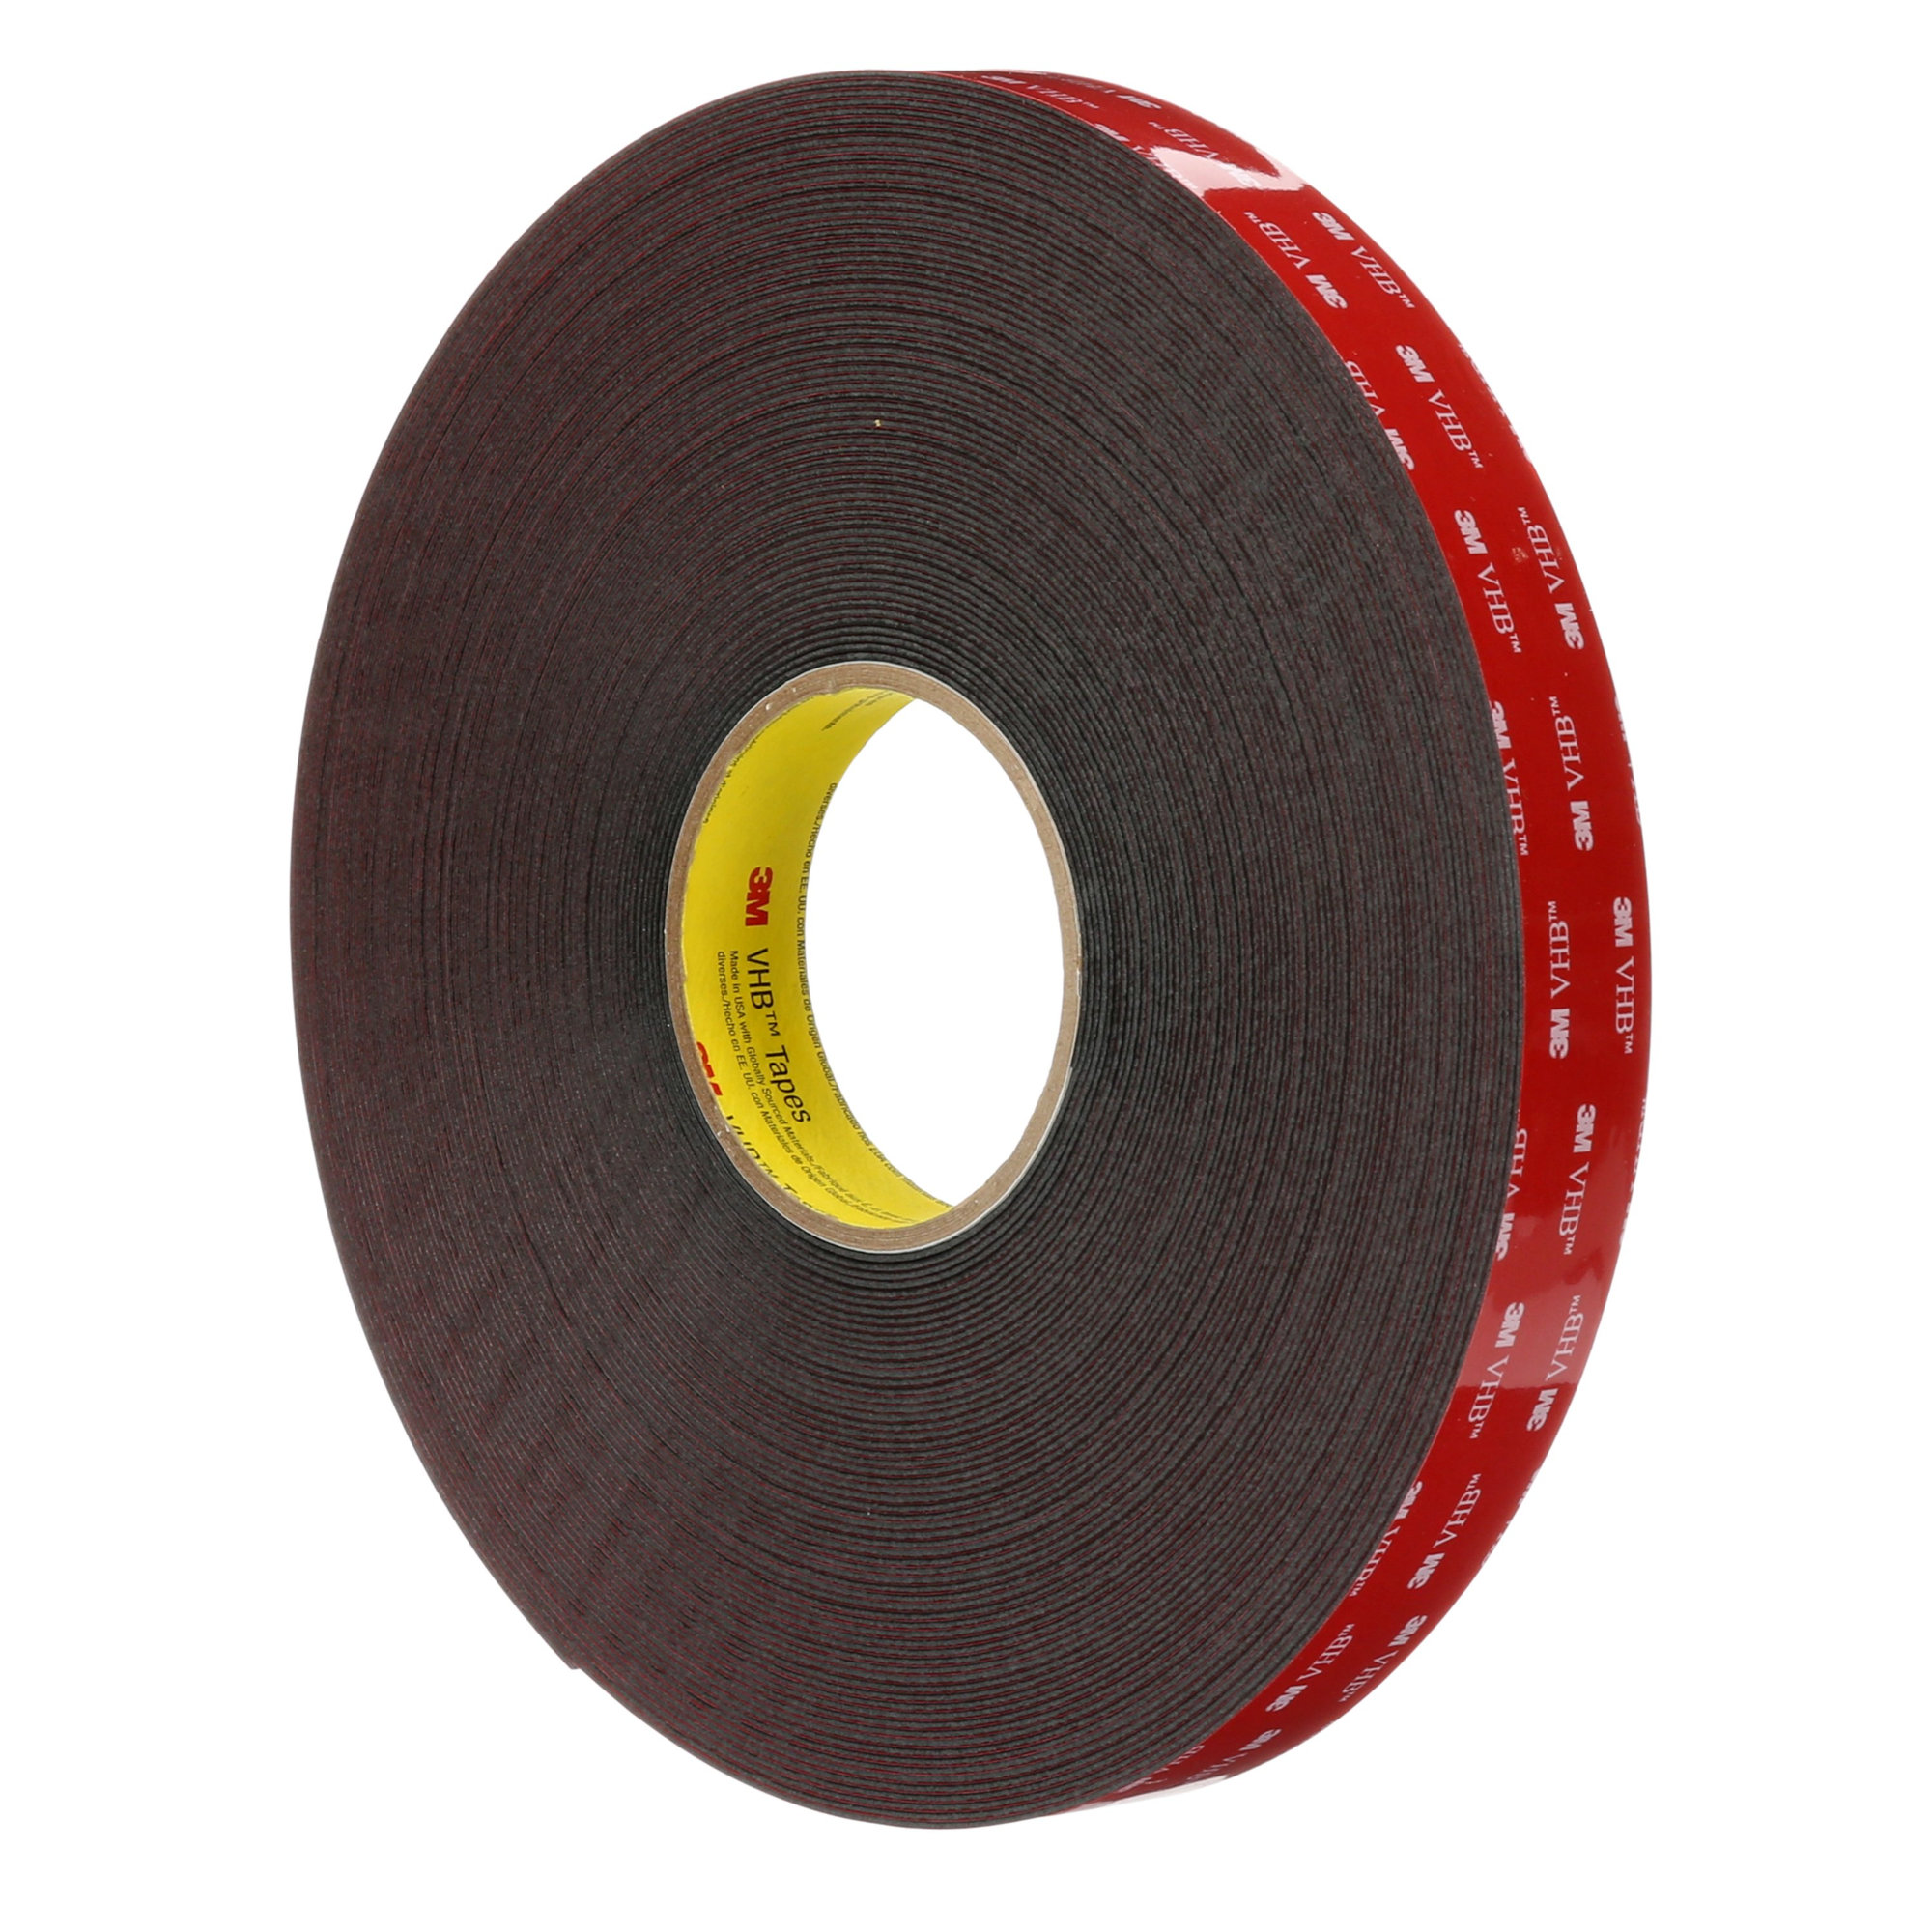 Applications of 3M VHB Tapes